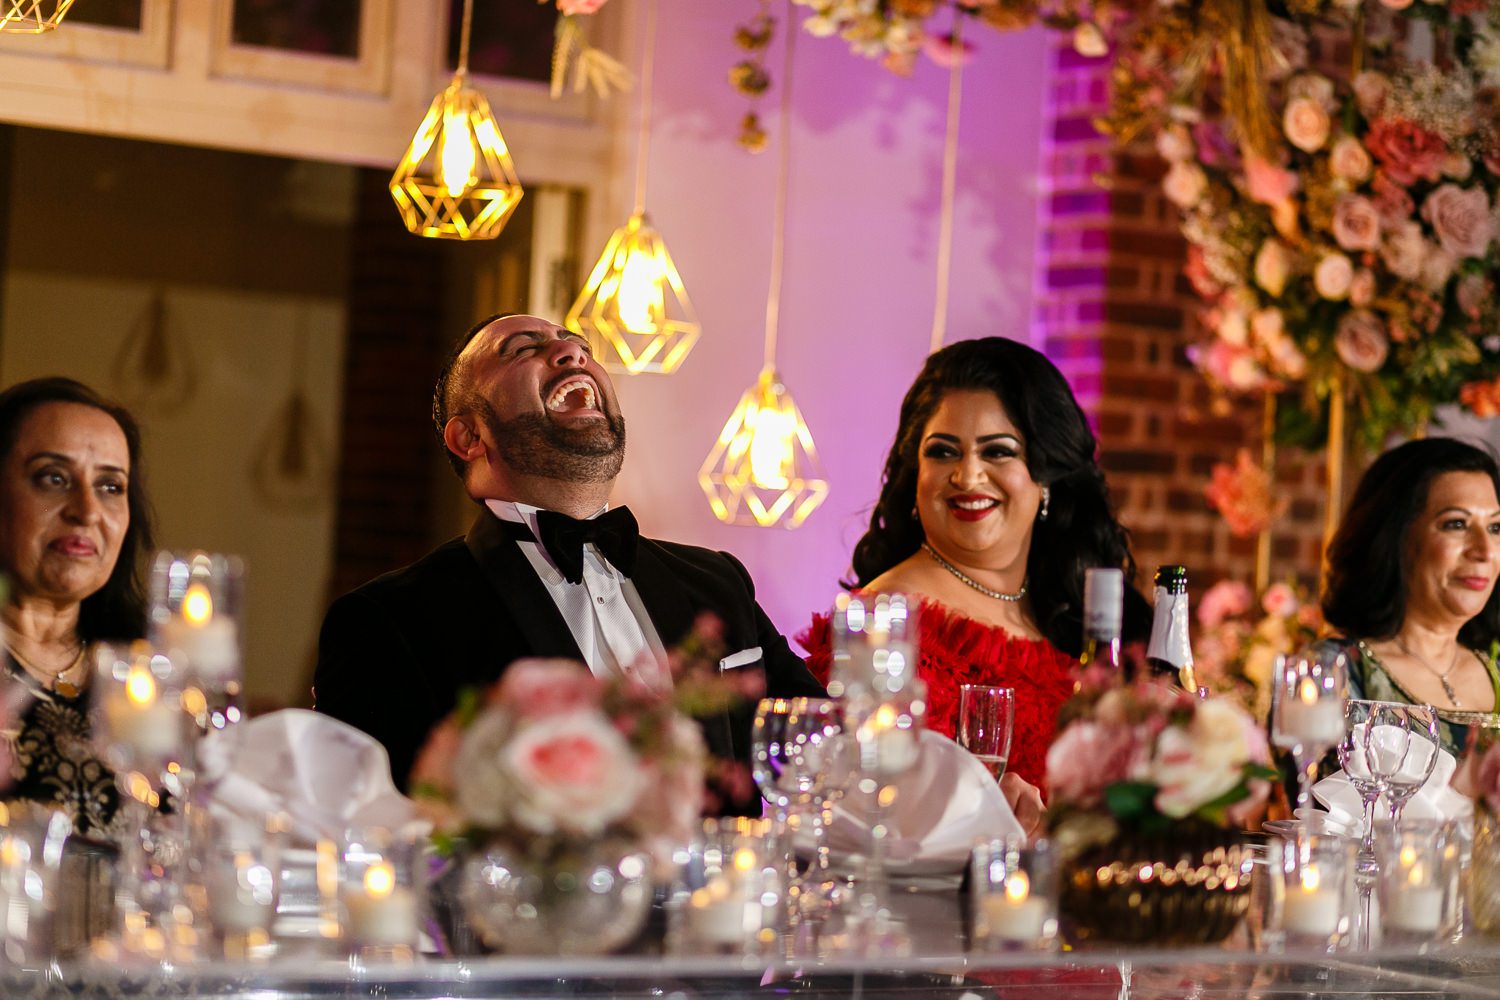 Wedding reception at Offley place